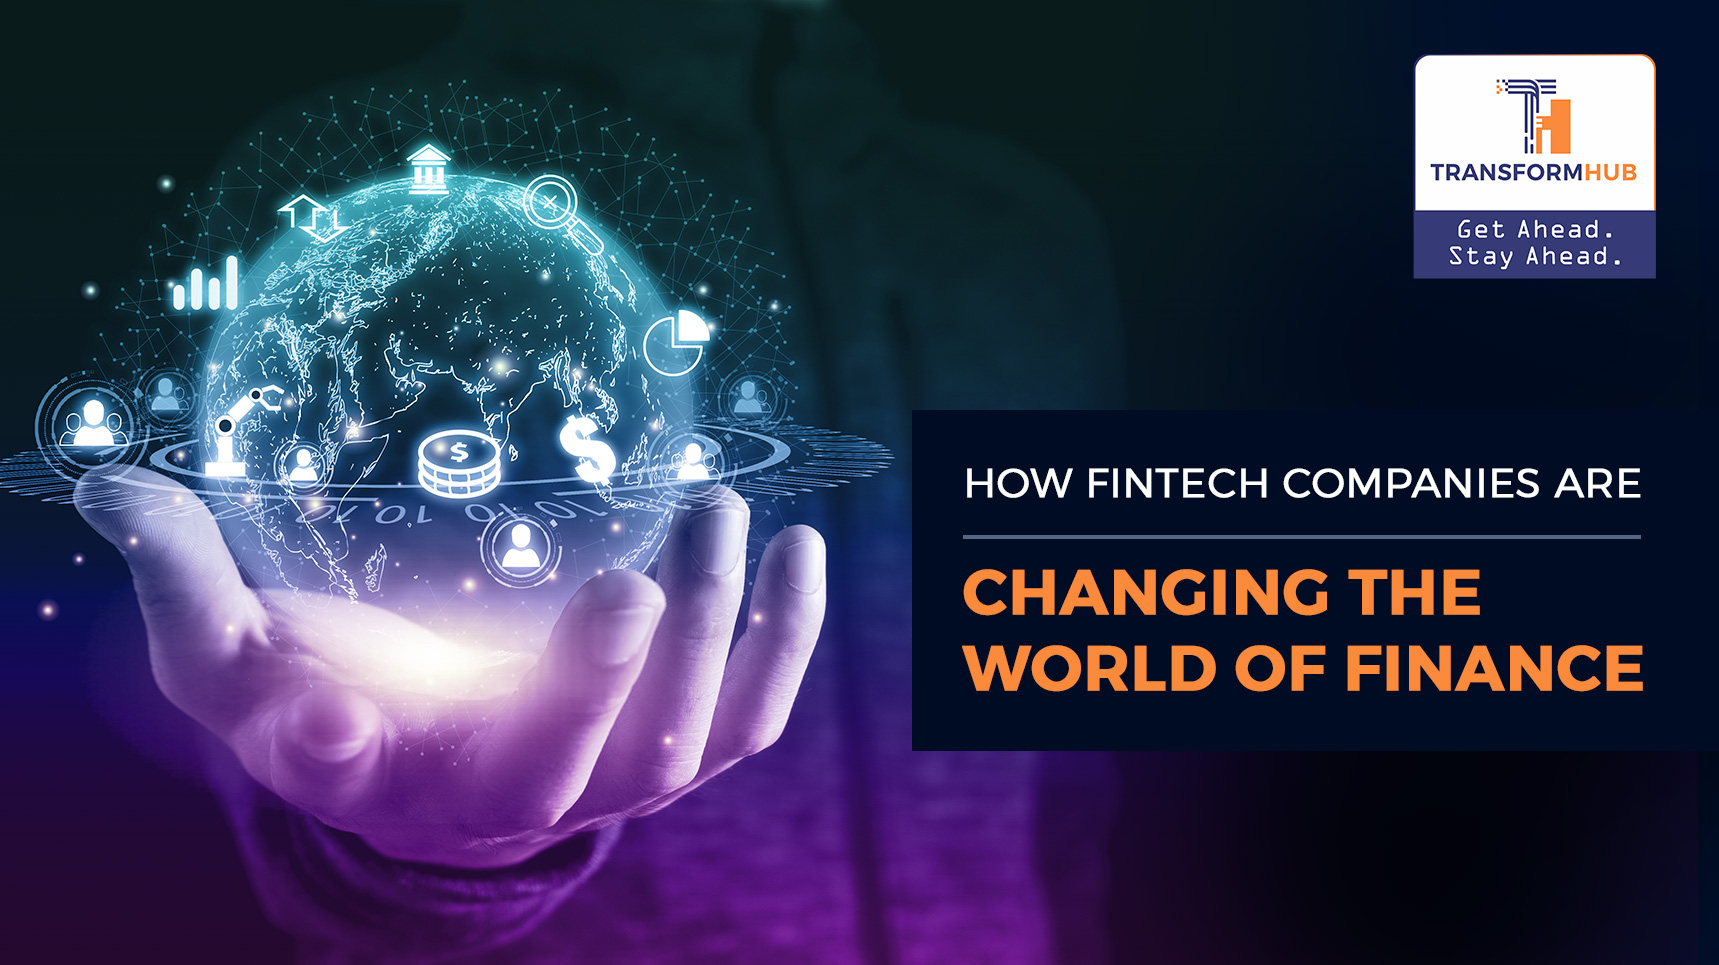 How FinTech Companies Are Changing the World of Finance